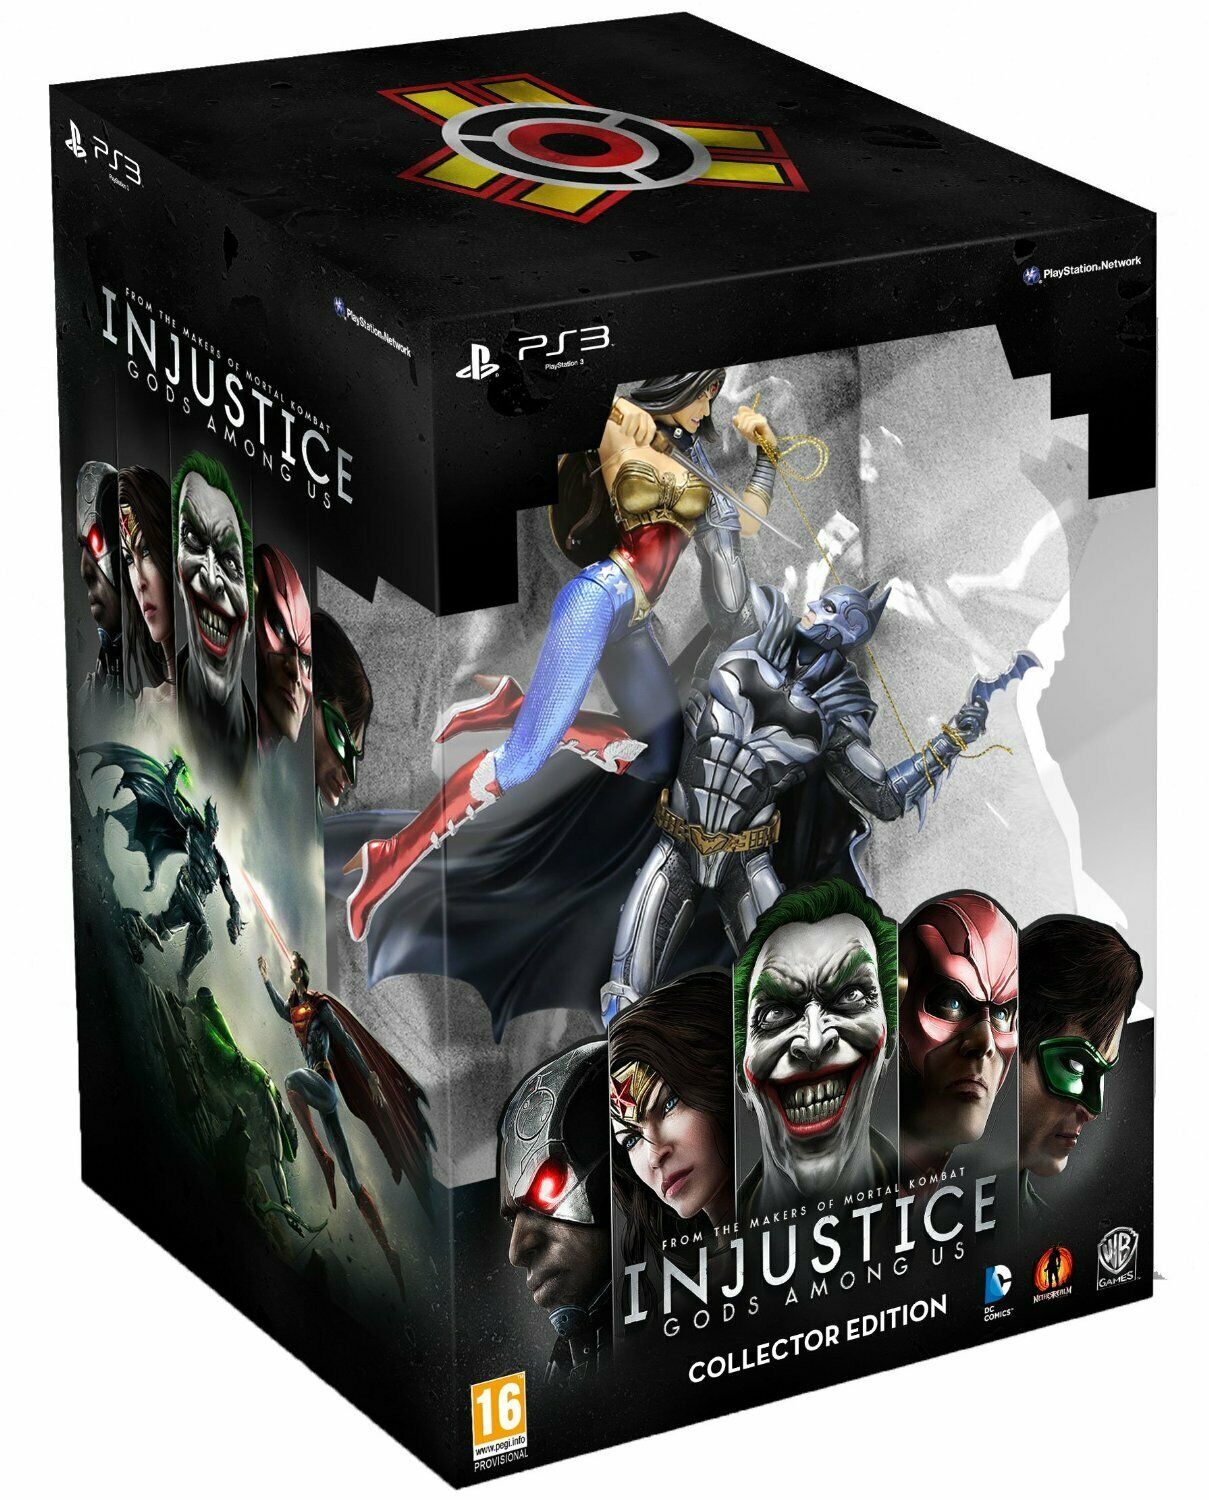 Injustice Gods Among Us Collectors Edition (PS3) - Figurák Special Edition